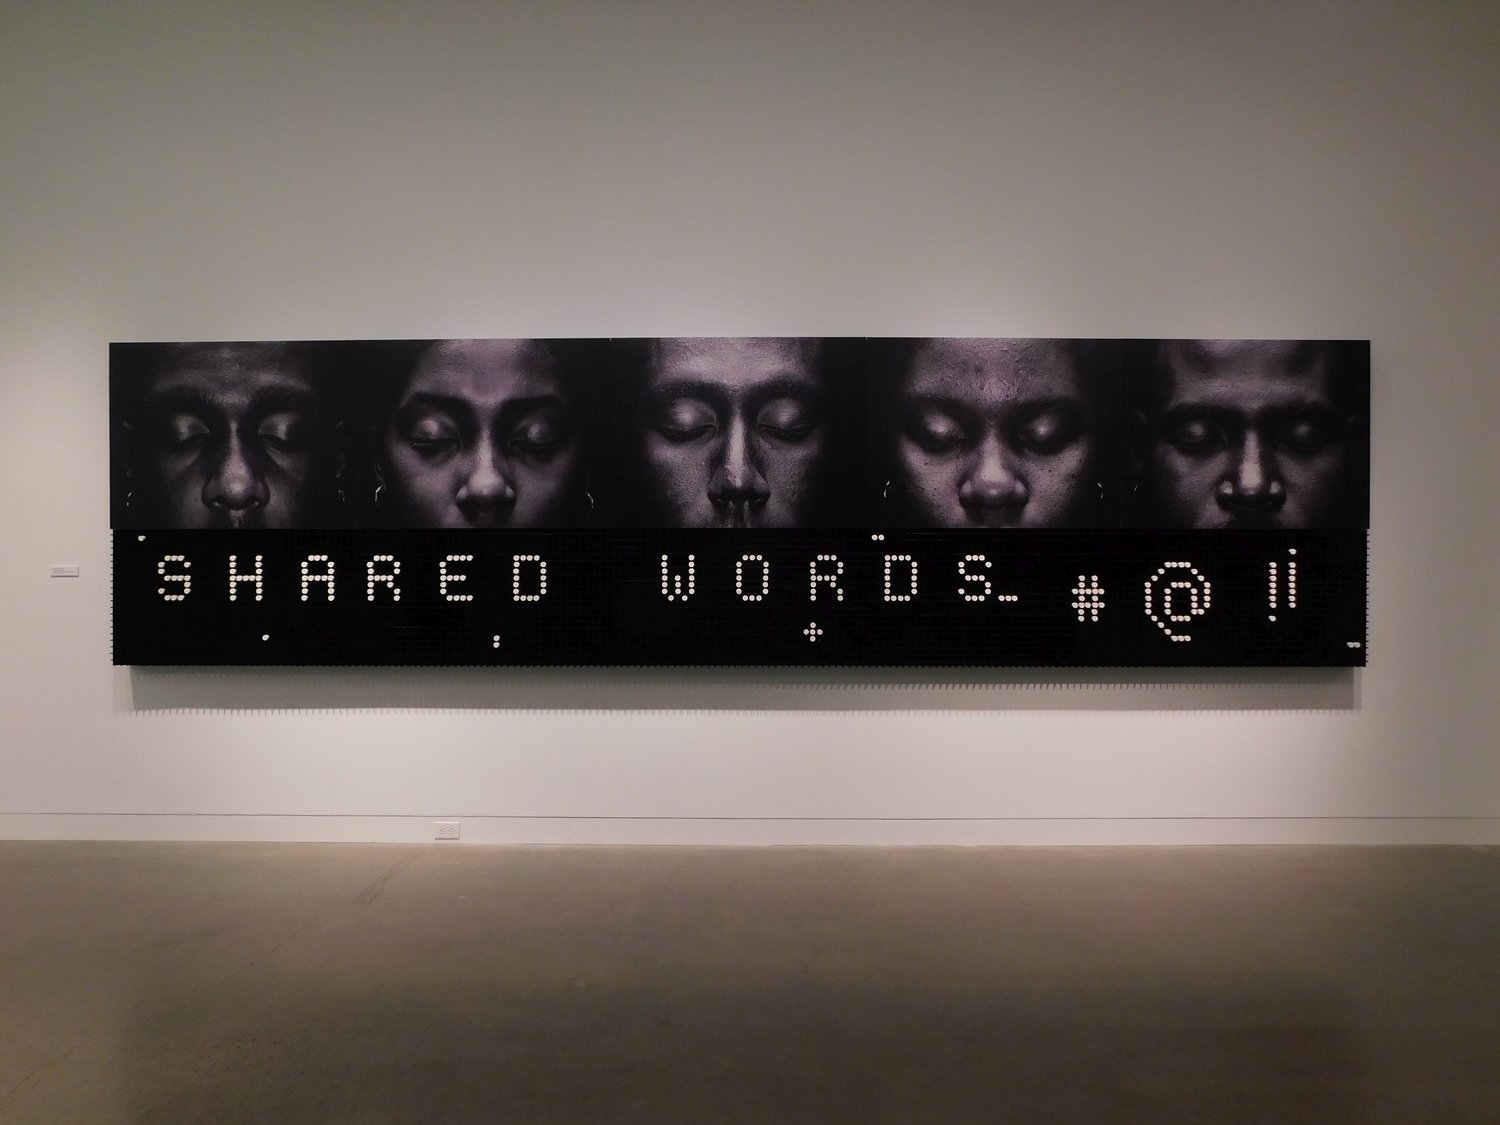 “Shared Words” by Alexandre Arrechea features five black and white portraits printed on an aluminum sheet mounted above a scoreboard-like acrylic grid covering the subjects’ mouths. Visitors are invited to give voice to those depicted by spelling words with sticks of white chalk.